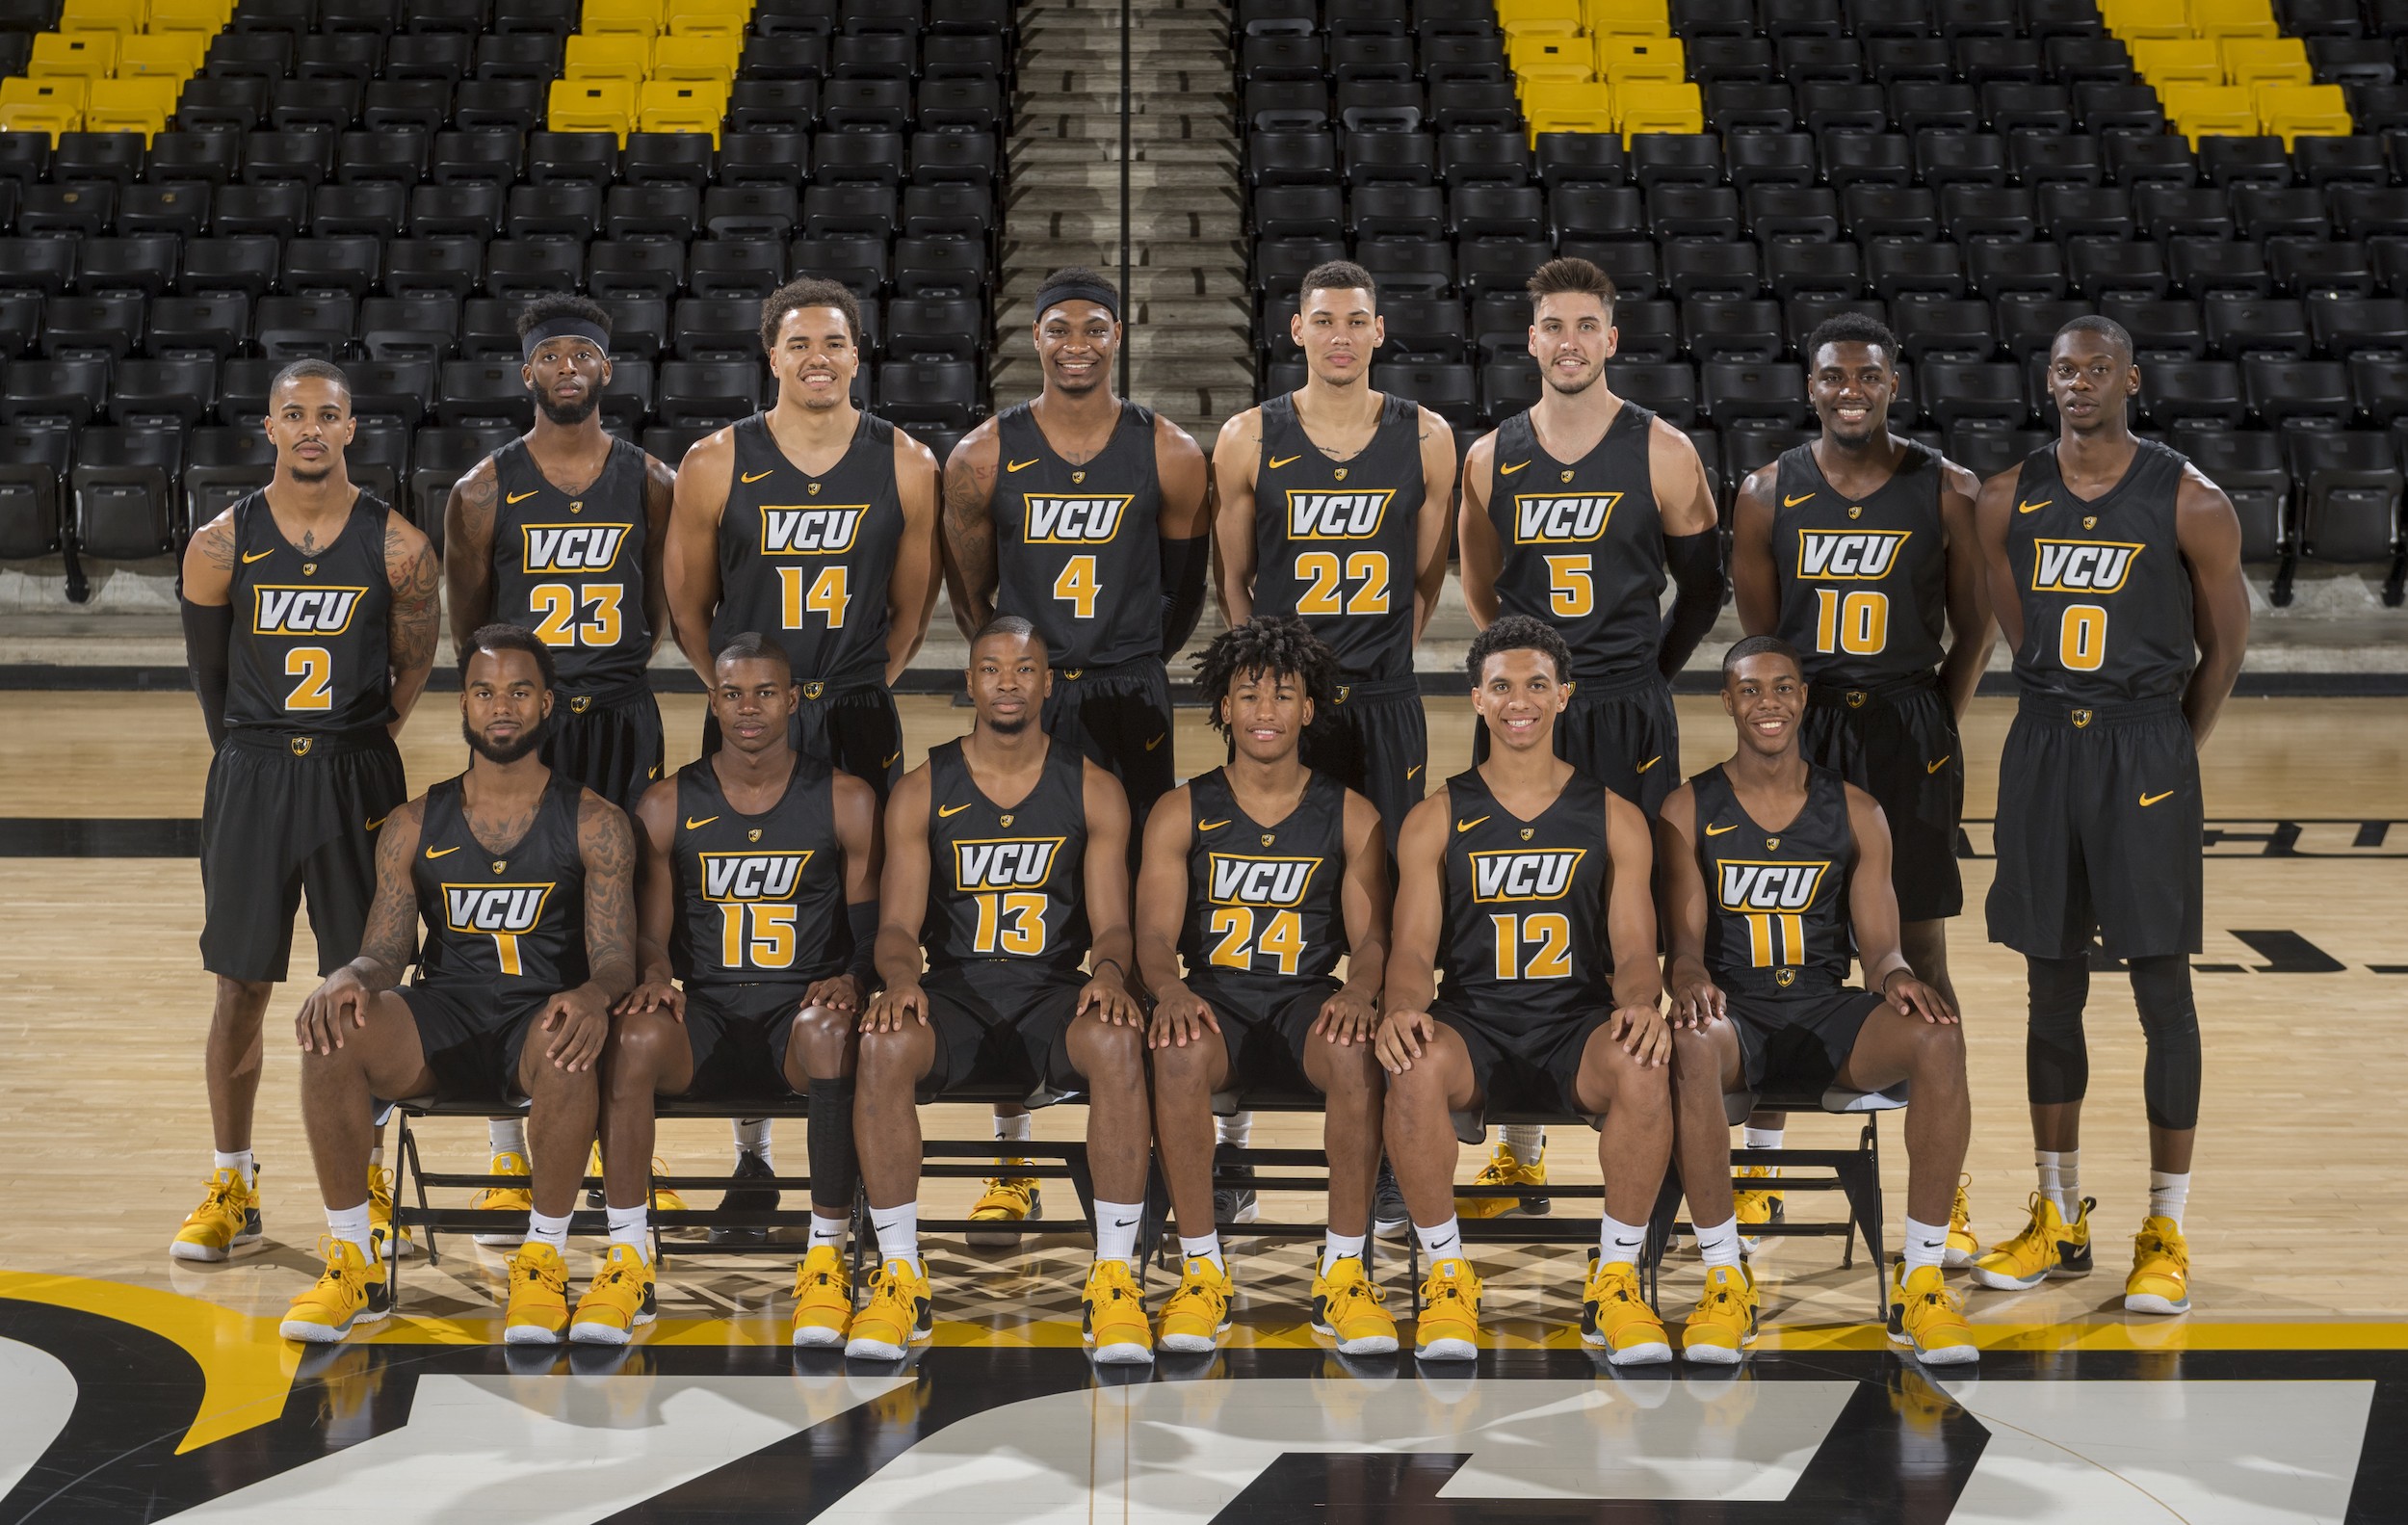 CSJ Men’s Hoops Preview, VCU at Texas, How To Watch and Fearless Prediction